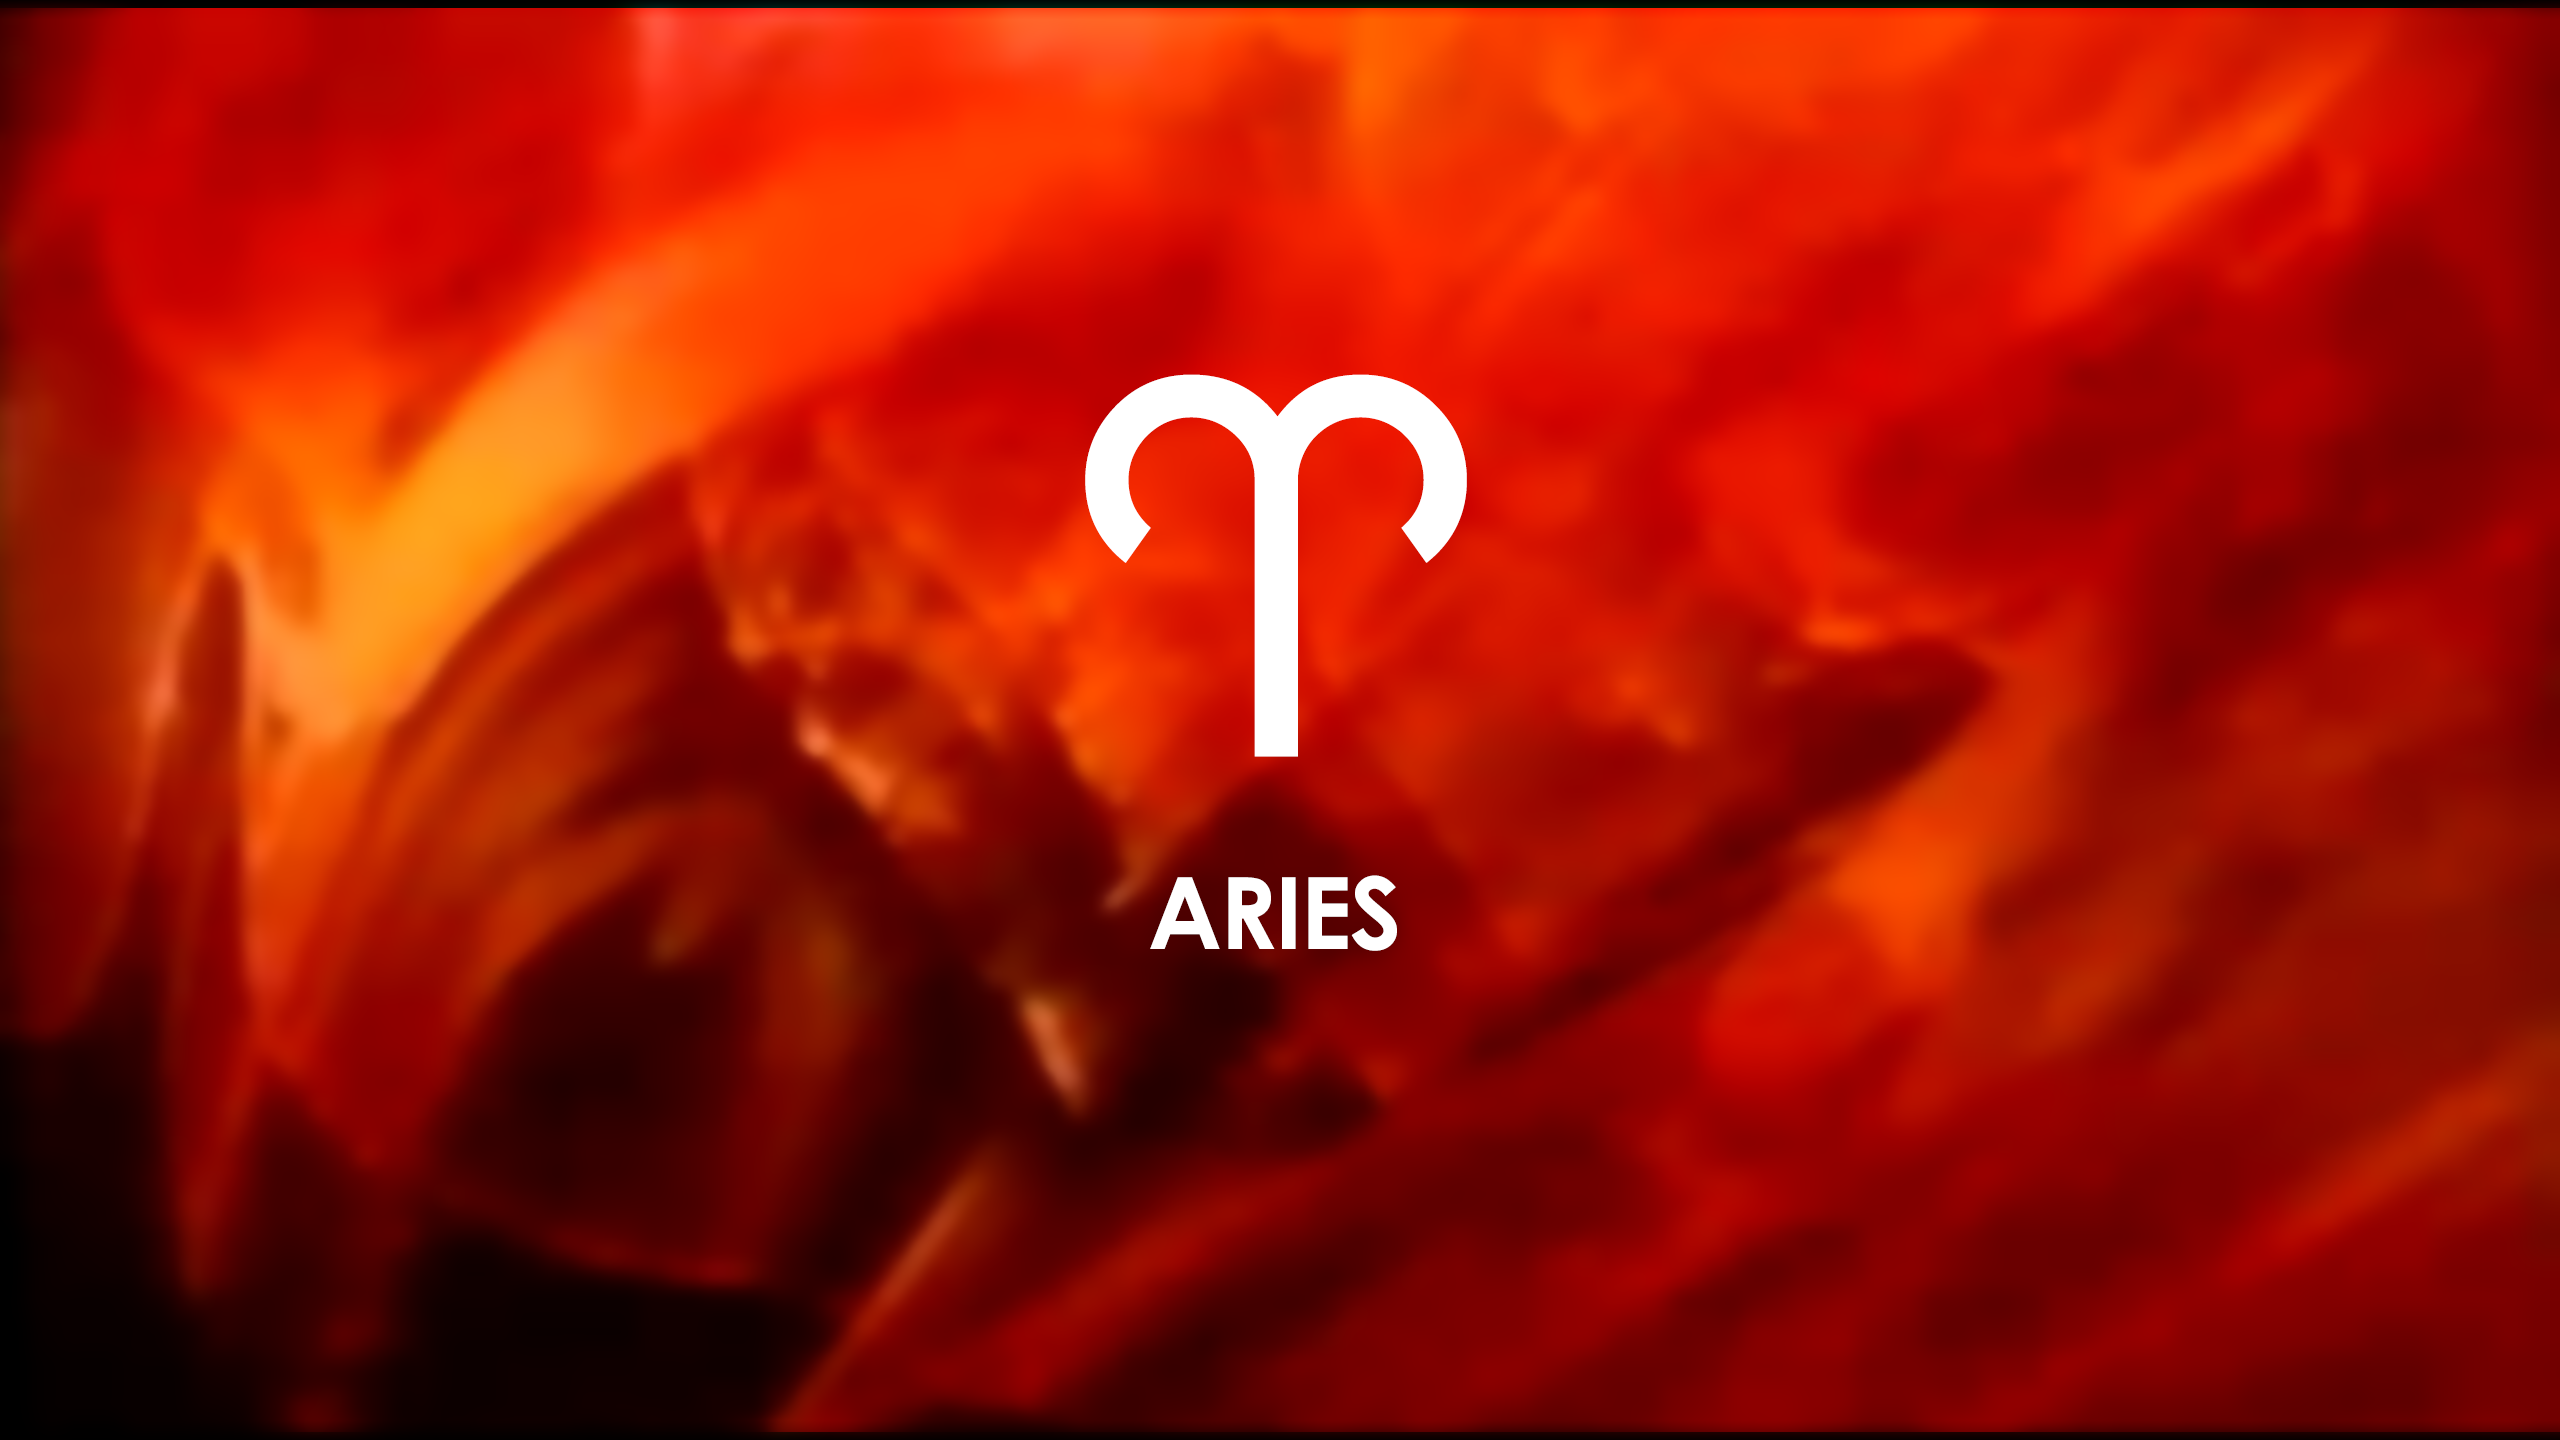 Aries sign on a red background Desktop wallpapers 1600x900